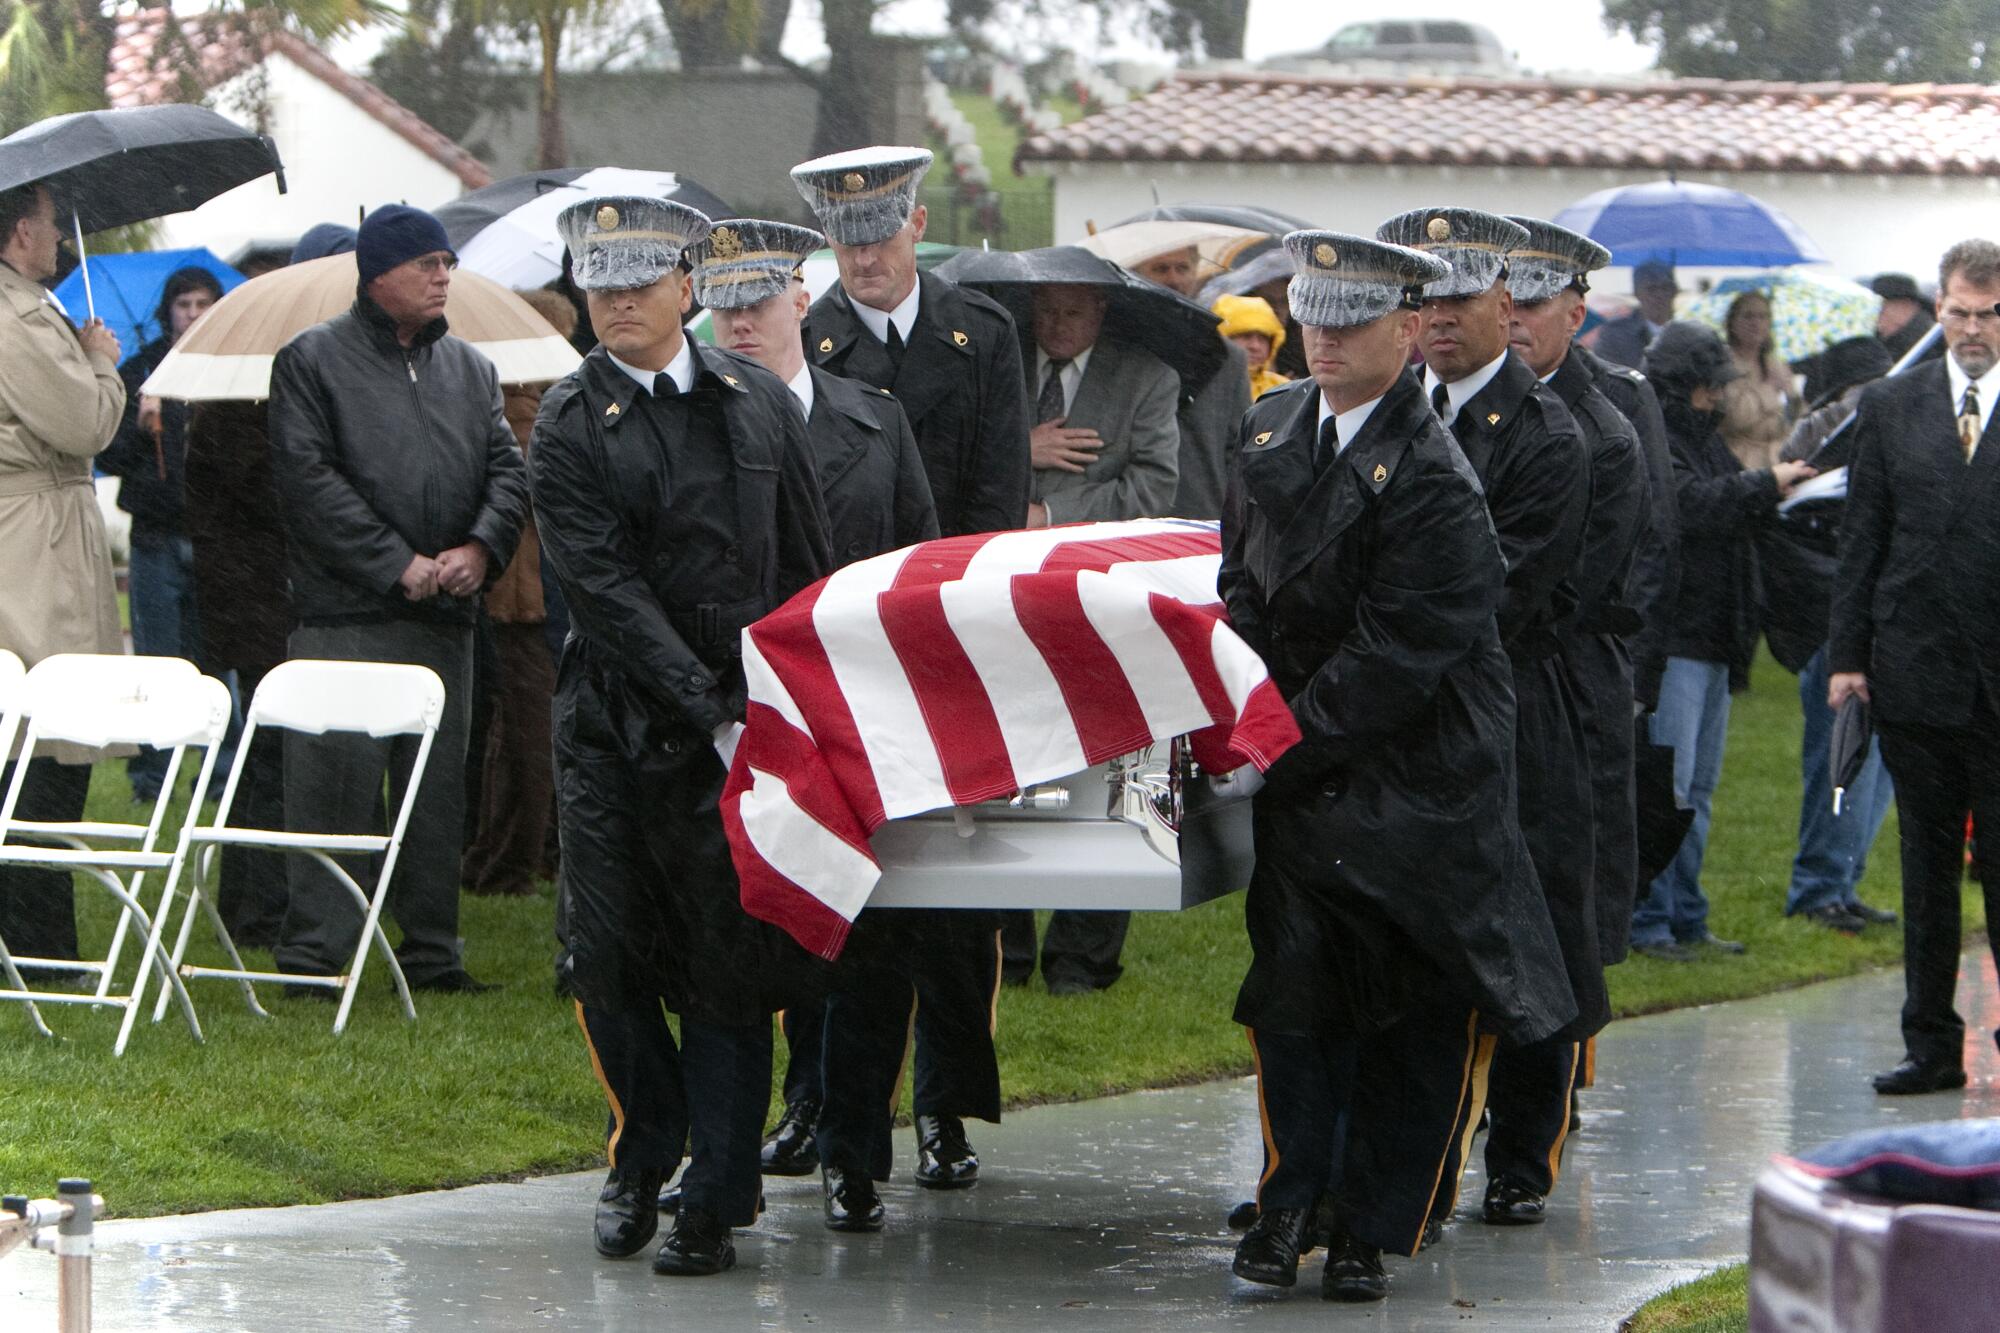 Pallbearers carry a casket at a military funeral